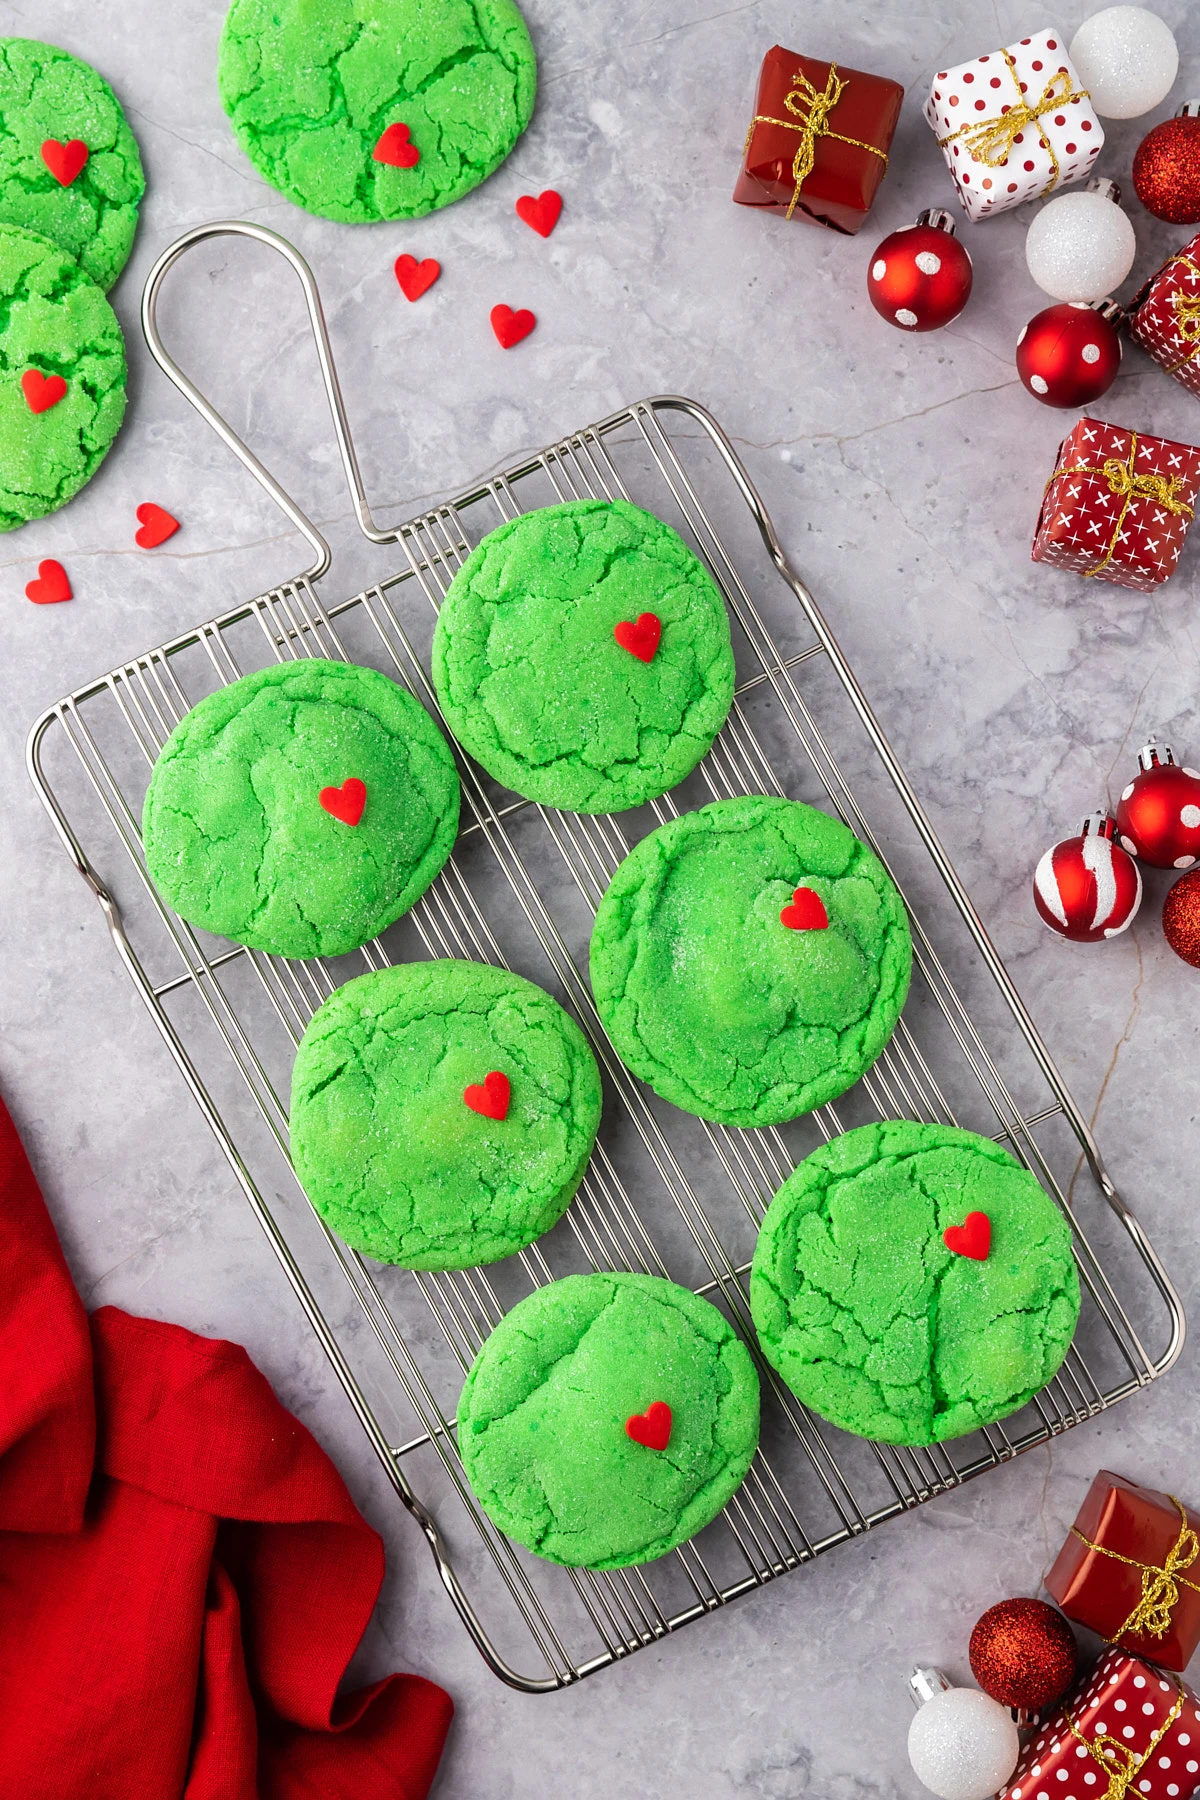 Make these delicious Grinch sugar cookies this holiday season! This easy-to-follow recipe is sure to make your Christmas even merrier.